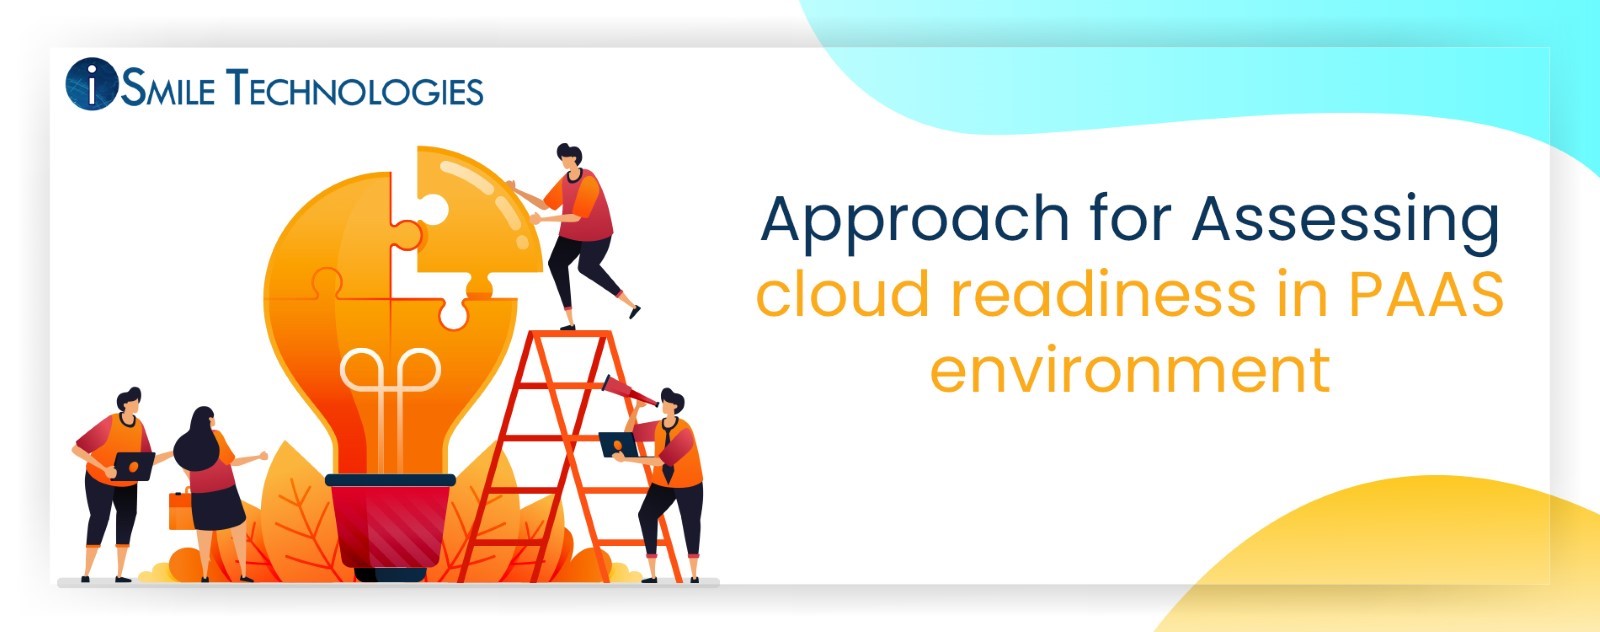 Approach for Assessing cloud readiness in PAAS environment